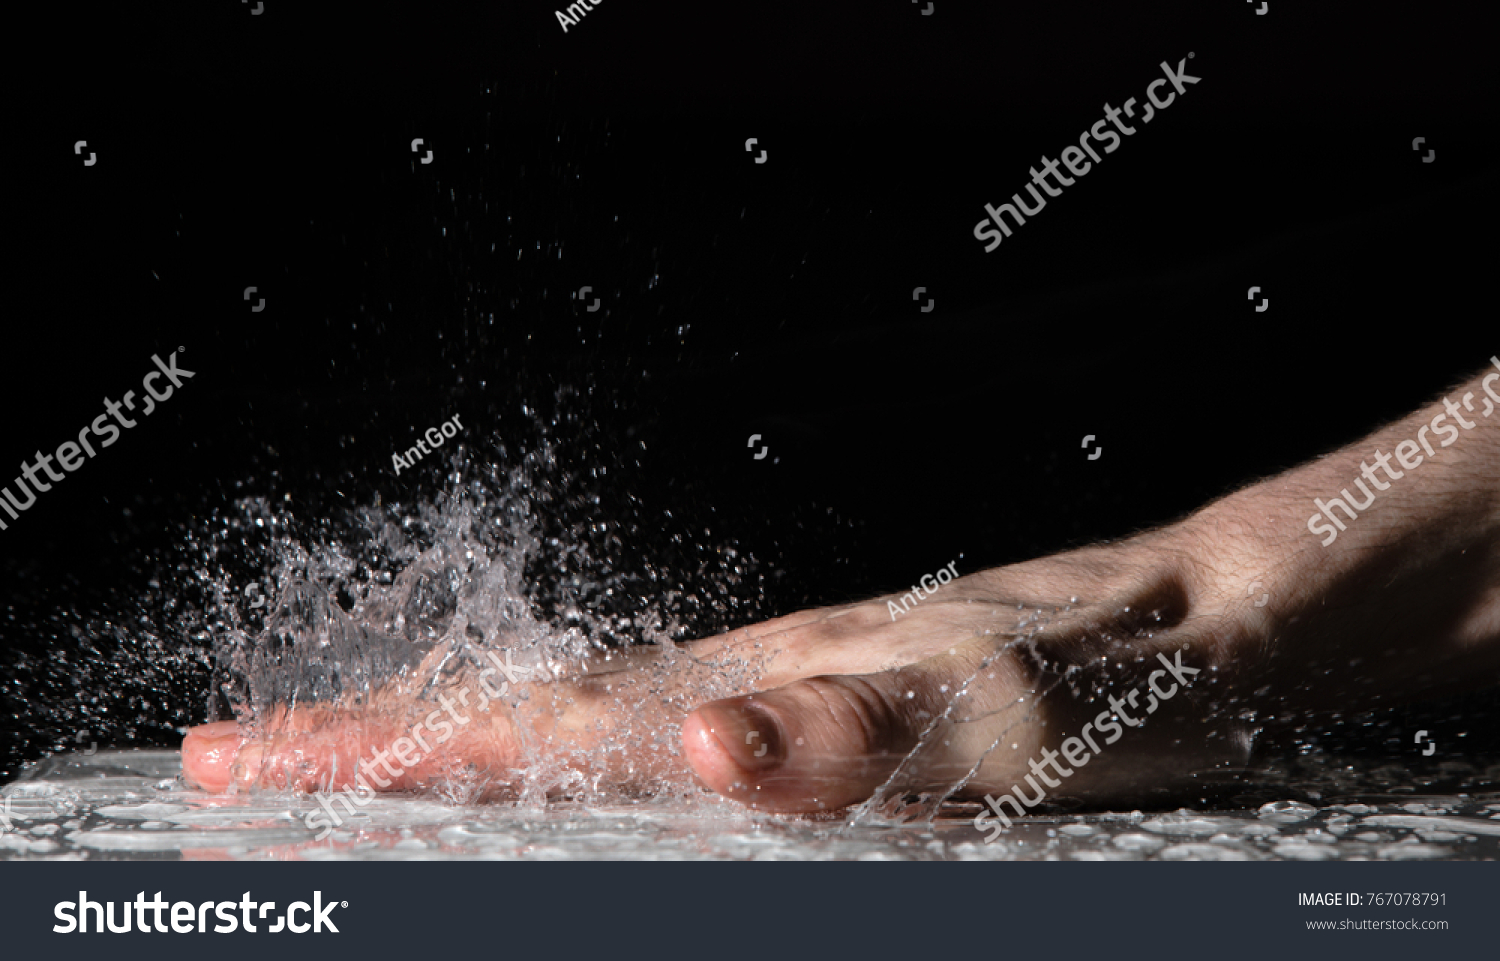 Splash of water drops after clap hand on the table #767078791